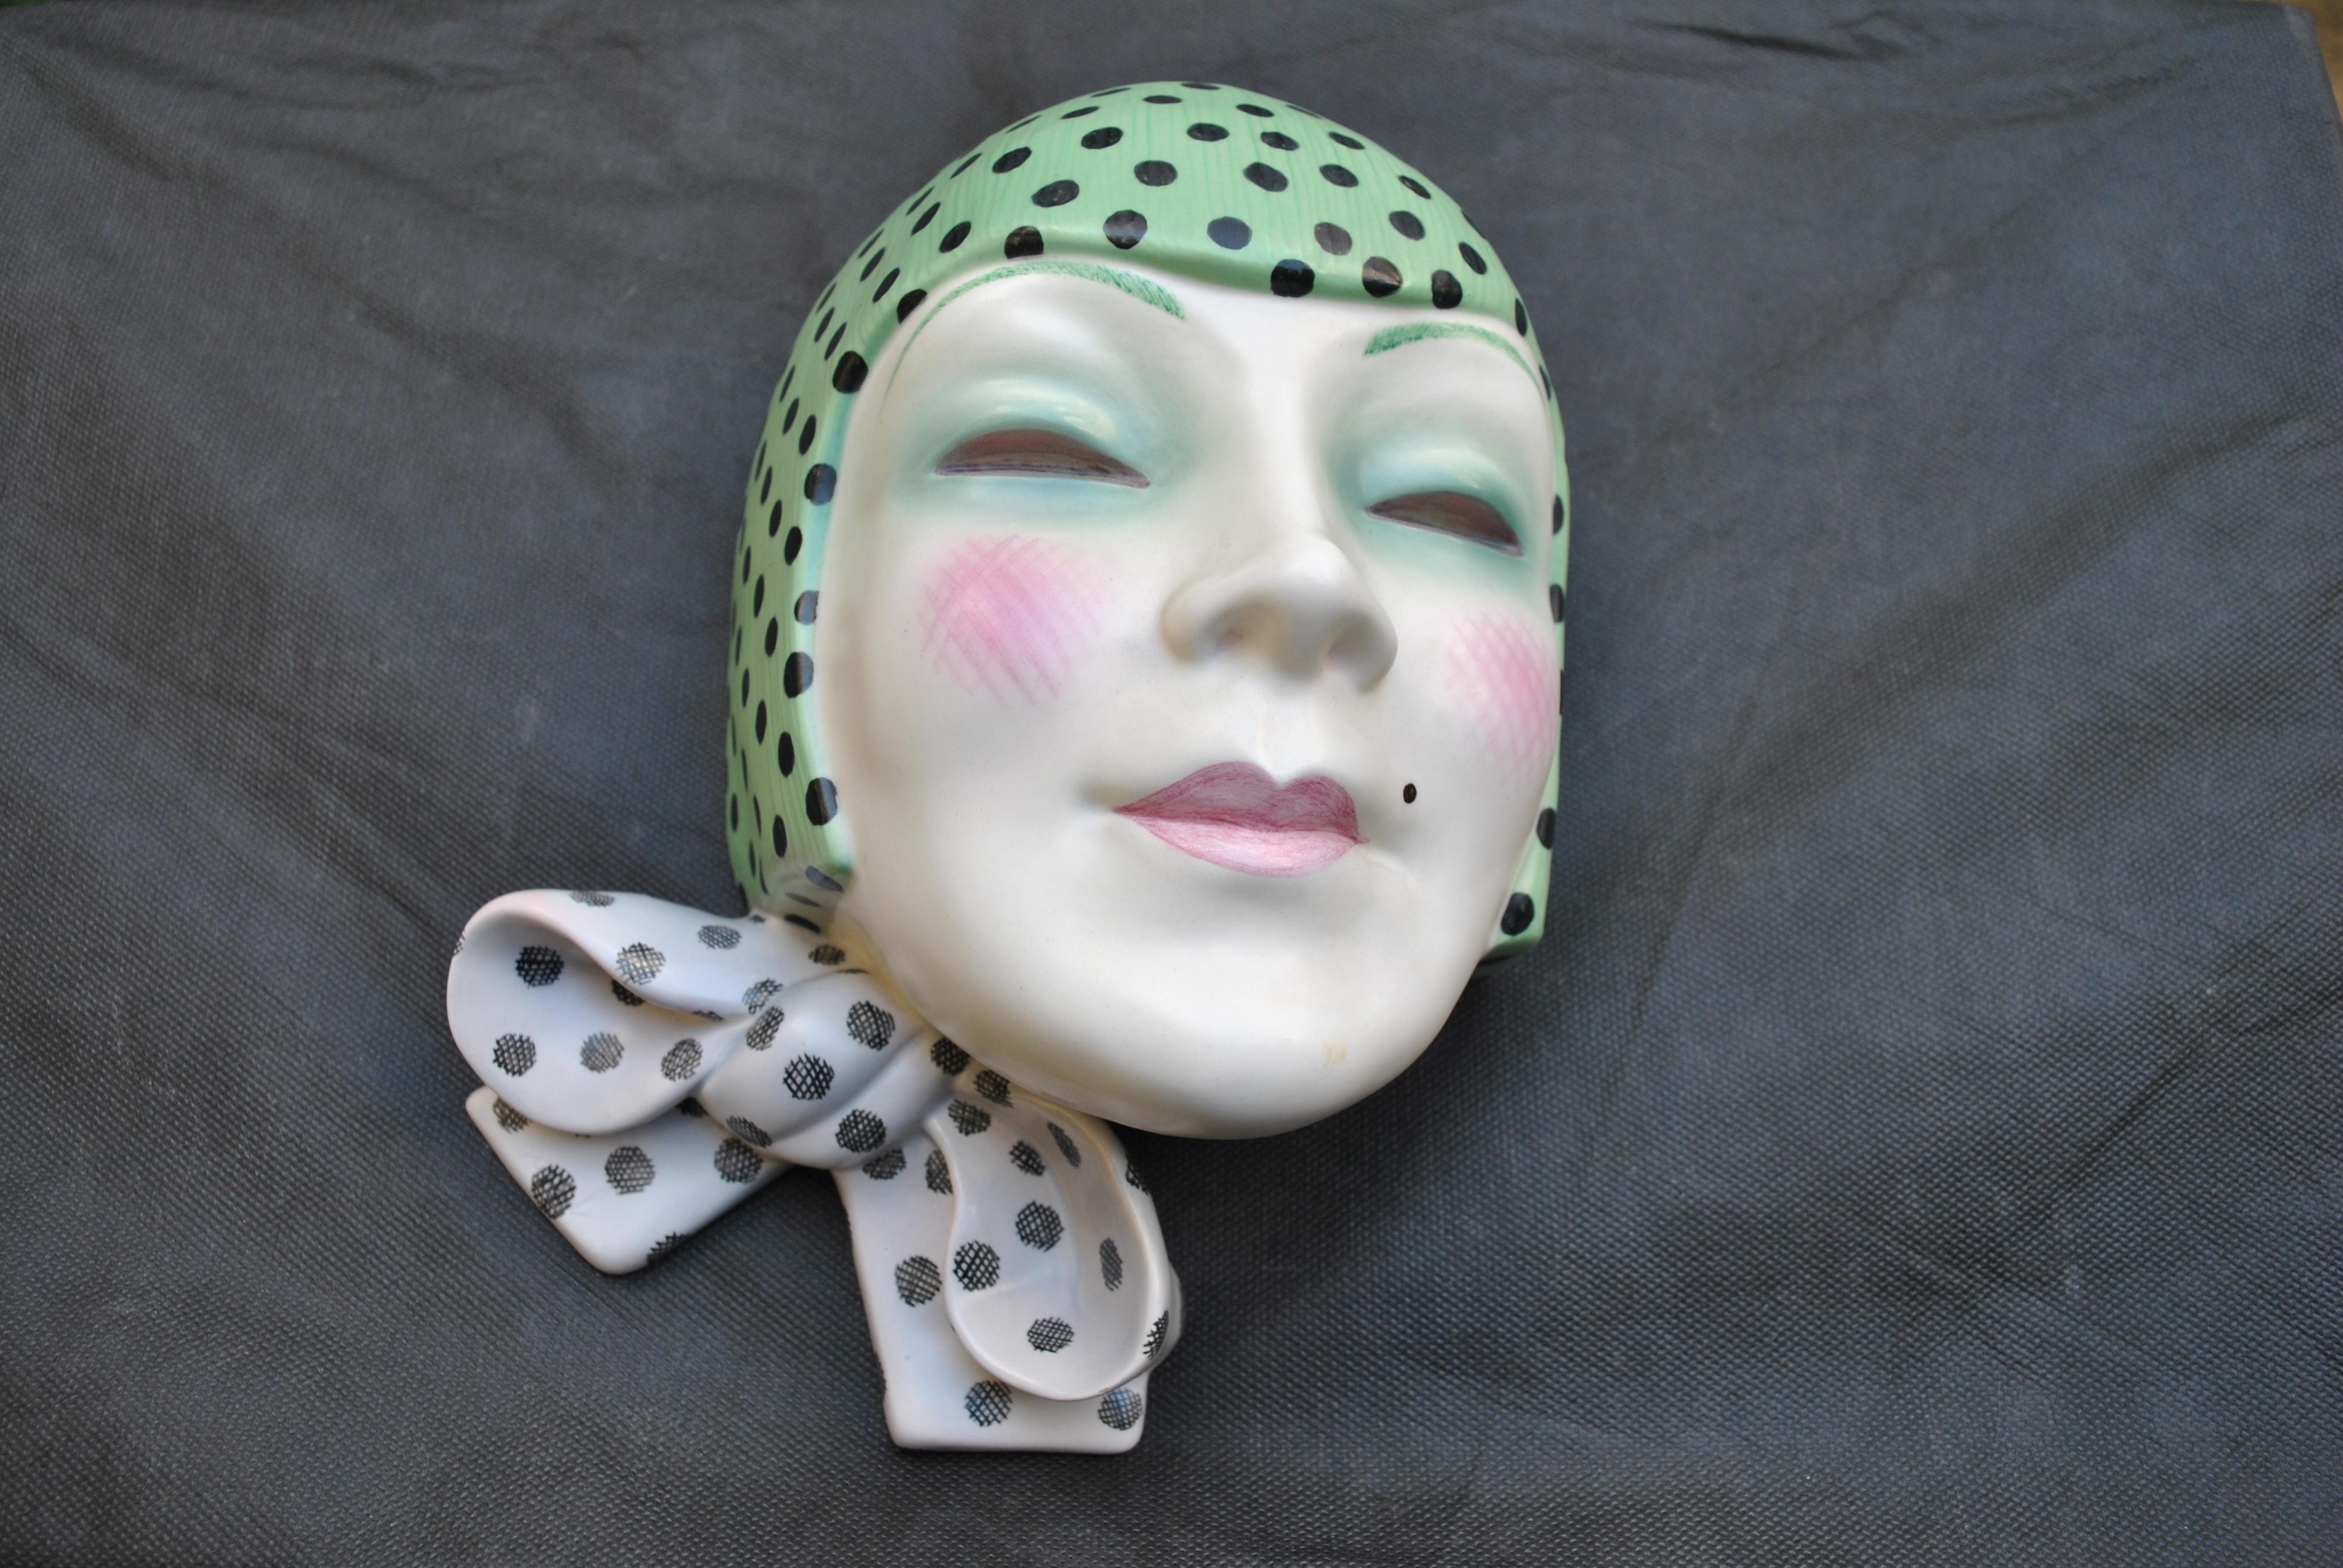 One of, if not the rarest Lenci wall mask designed by Helen Konig Scavini. The mask is called 'Maschera con nodo'. The mask is modelled as fashionable young woman in a spotted head scarf with large bow, in pure art déco style.
She has amazing hand